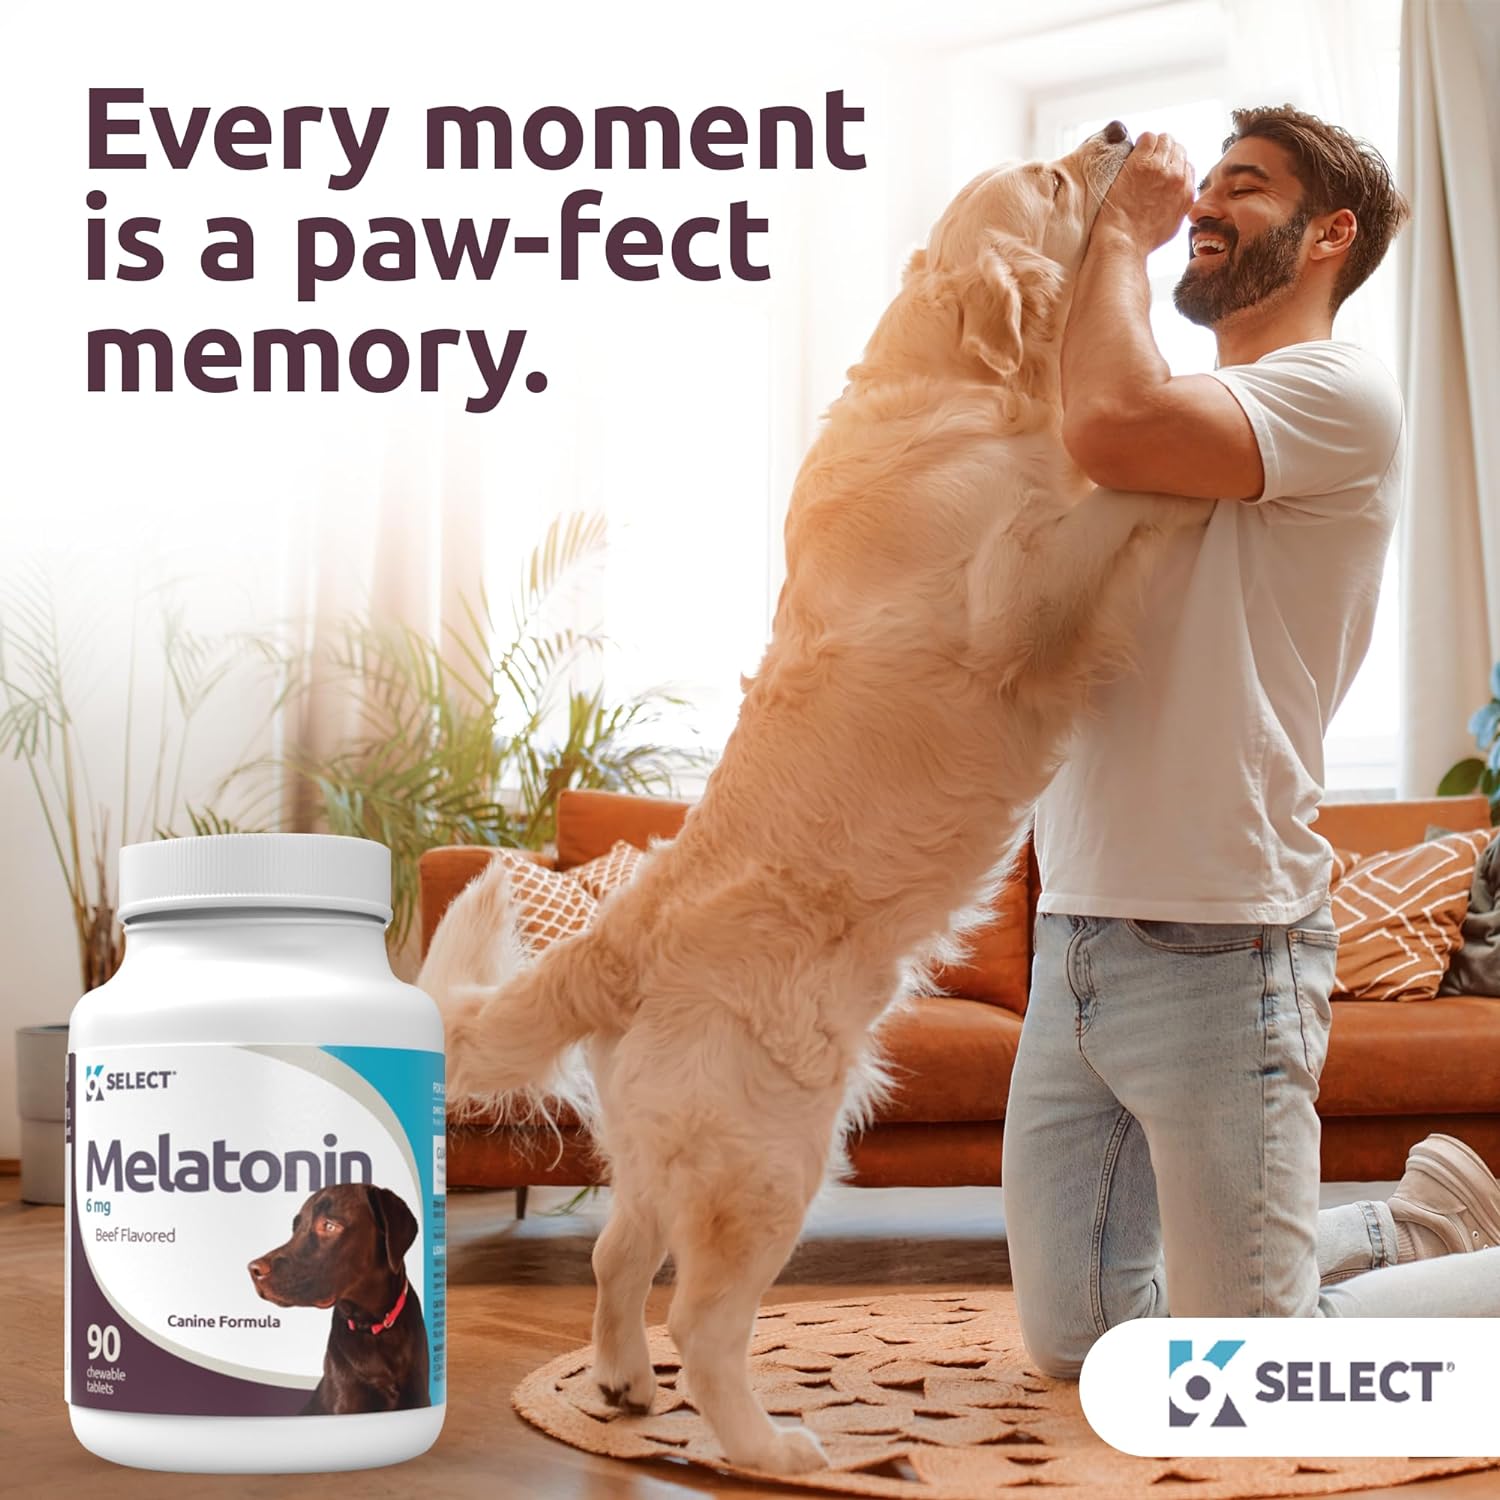 K9 Select Melatonin for Dogs, 6mg - 90 Beef Flavored Chewable Tablets for Small to Large Dogs - Dog Melatonin for Small Dogs to Large Dogs Breeds : Pet Supplies